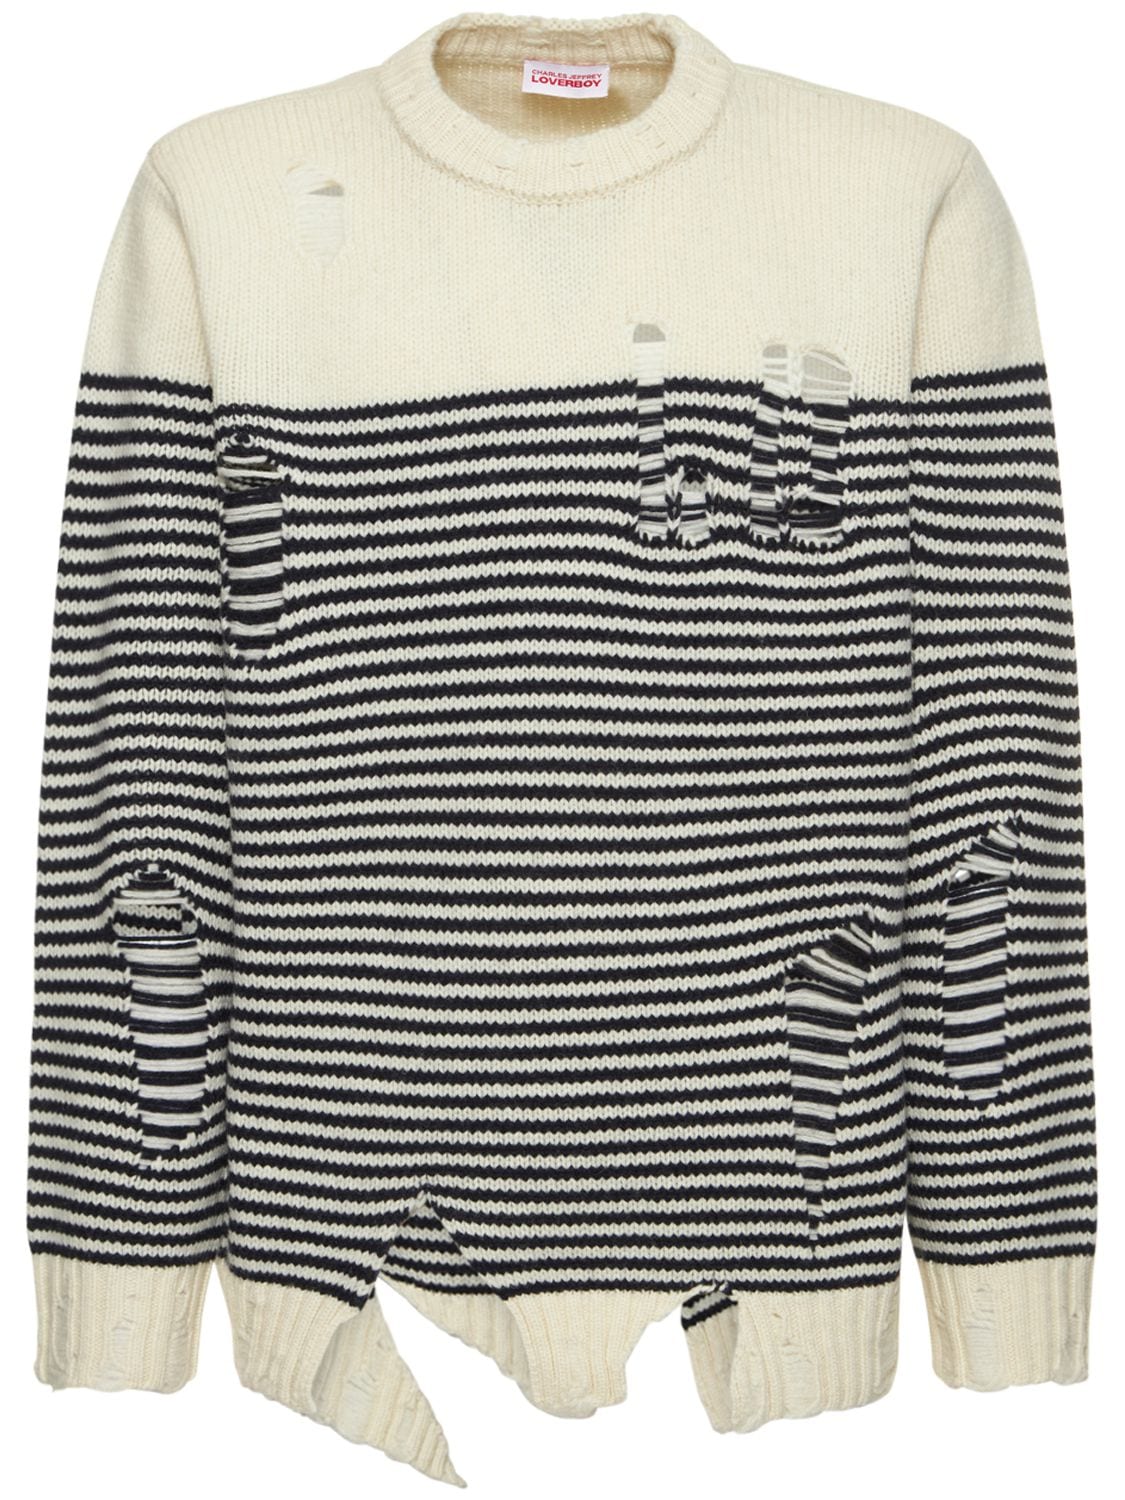 Distressed Wool & Recycled Poly Sweater - CHARLES JEFFREY LOVERBOY - Modalova